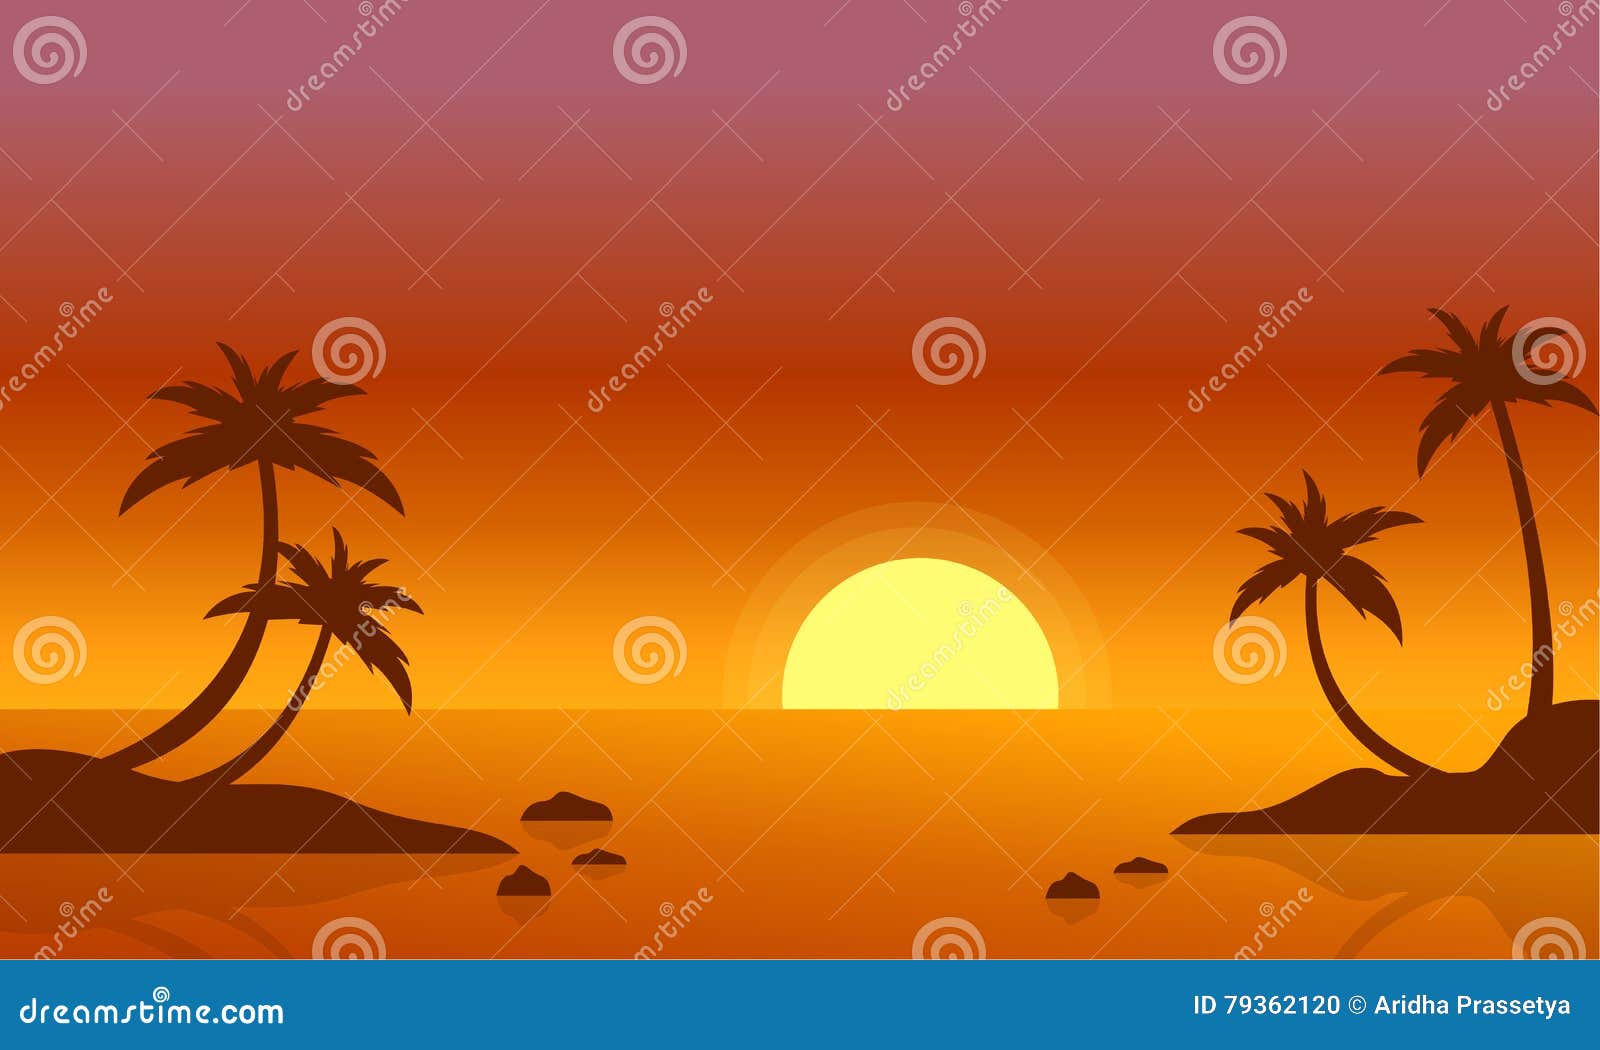 Beach at Sunrise Scenery of Silhouette Stock Vector - Illustration of ...